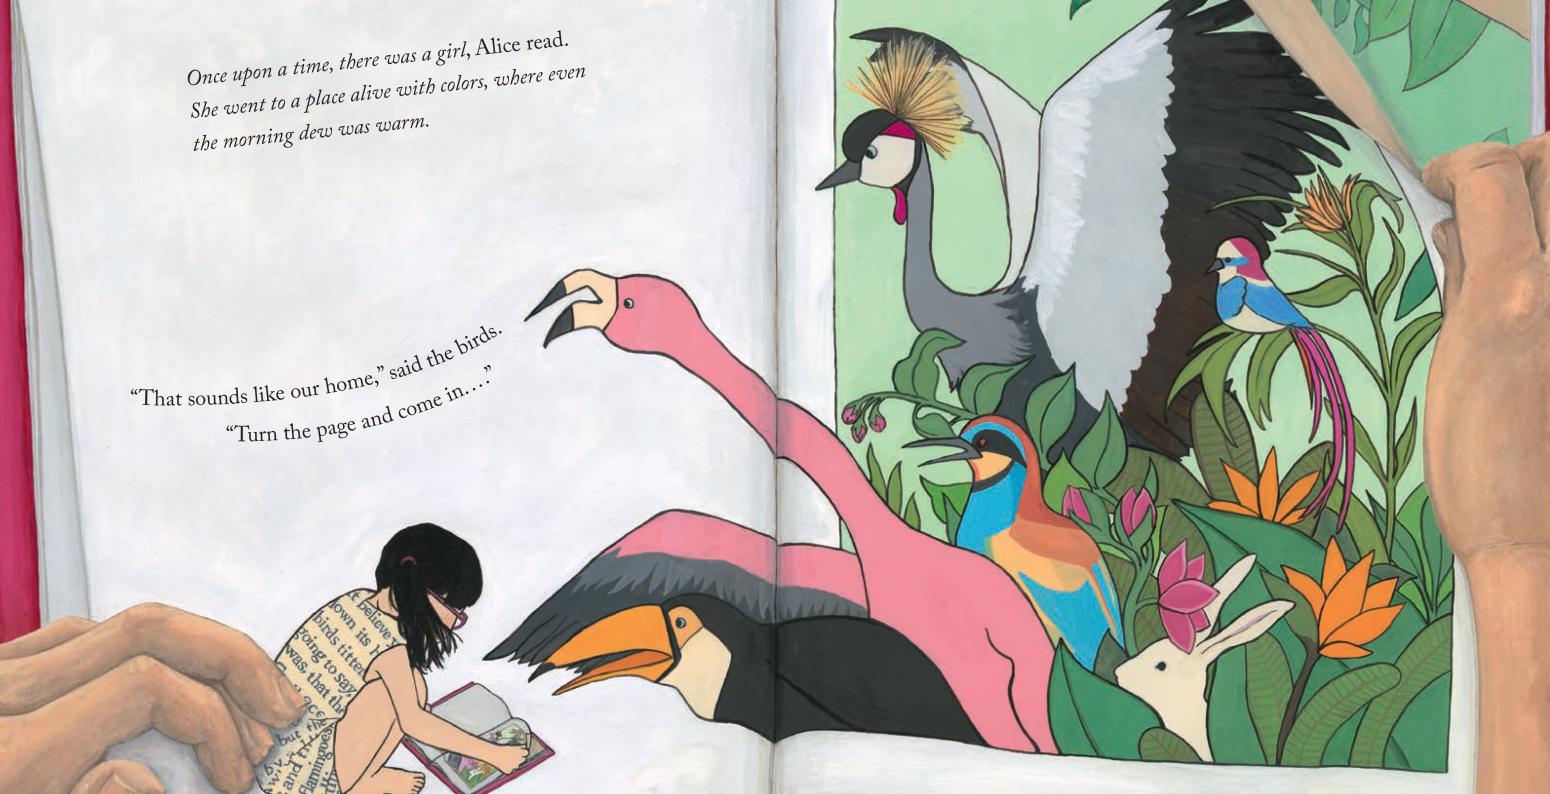 Hands turning the page of a book. On the book's illustration, a young girl also turns the page of a book while colorful animals surrounded by green foliage look at her.